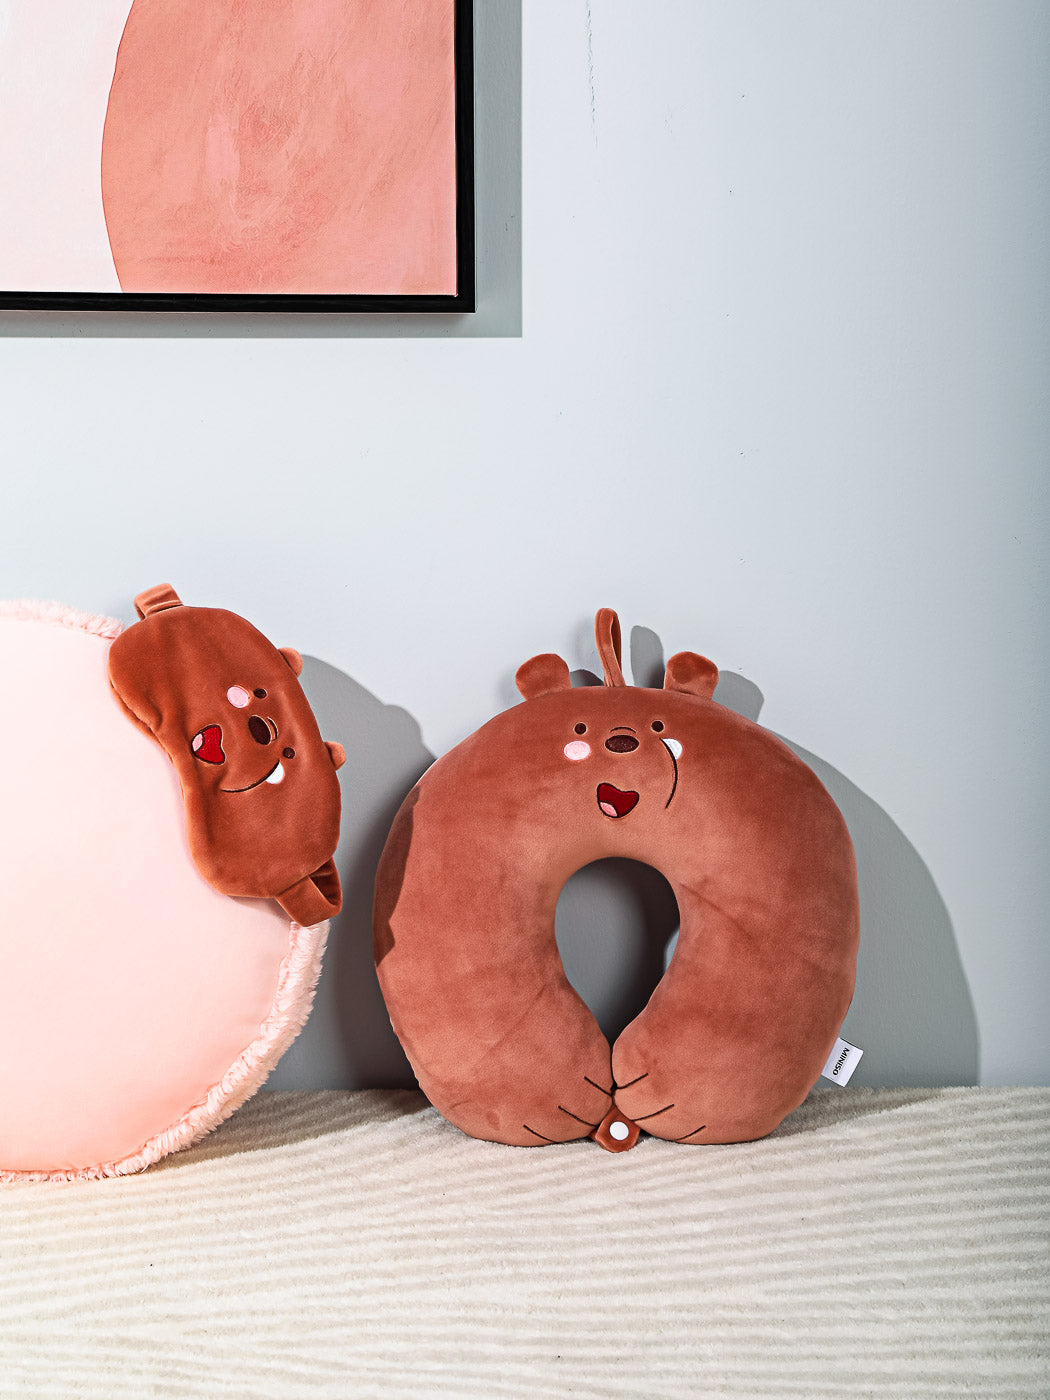 MINISO WE BARE BEARS COLLECTION 4.0 U-SHAPED PILLOW (GRIZZLY) 2010570710108 U-SHAPED NECK PILLOW